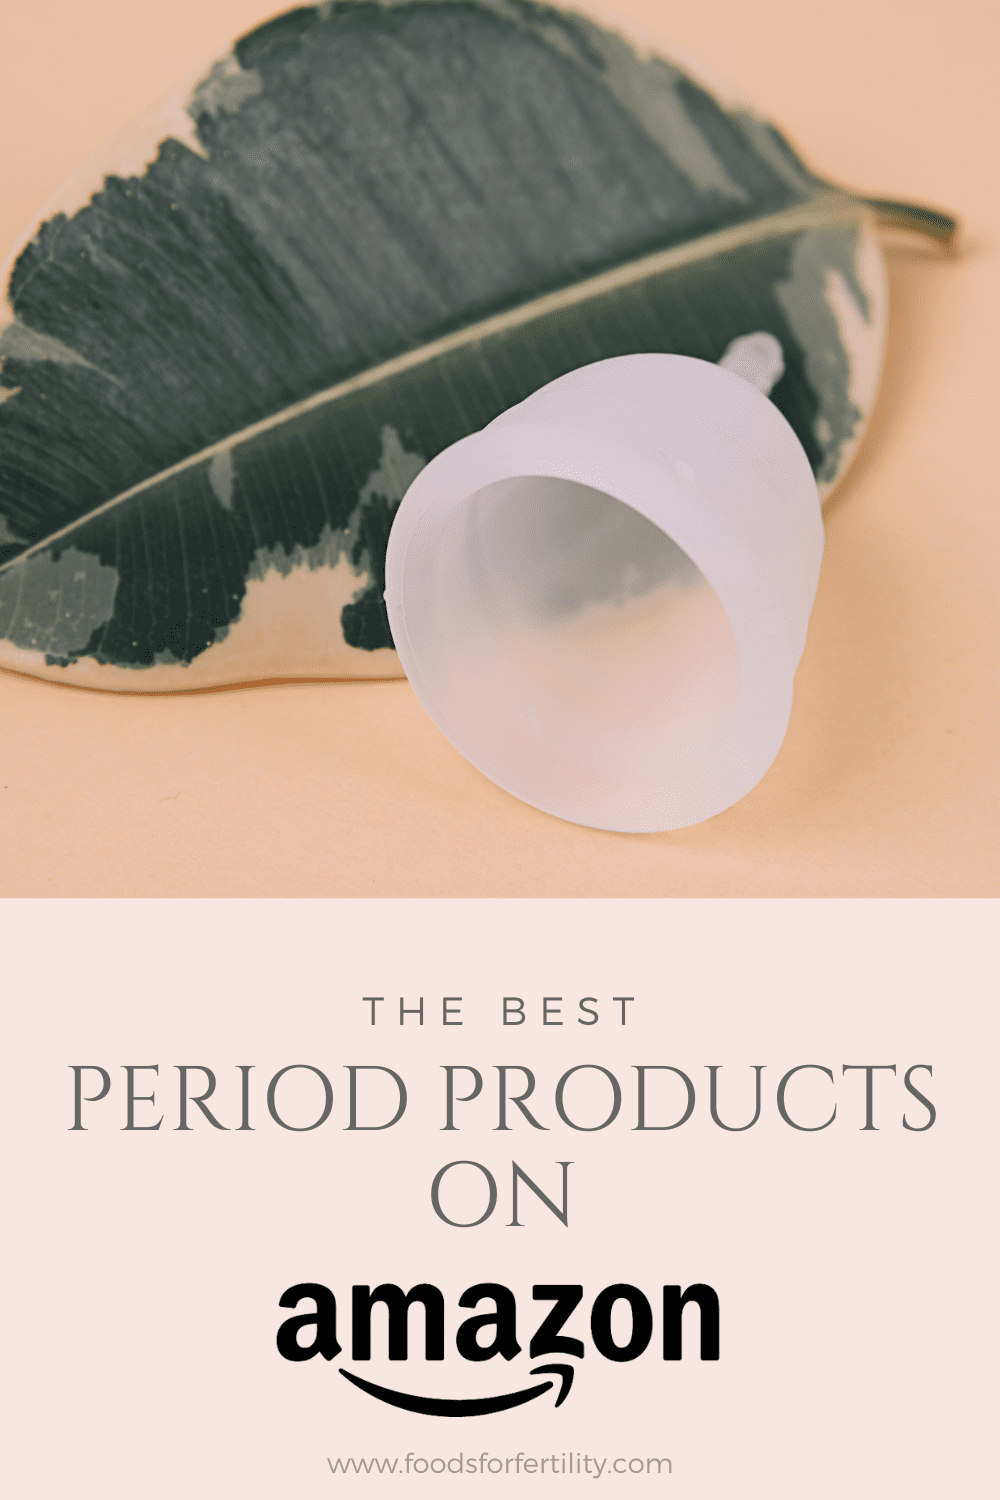 The Best Period Cups Menstrual Products and PMS Treatments on Amazon